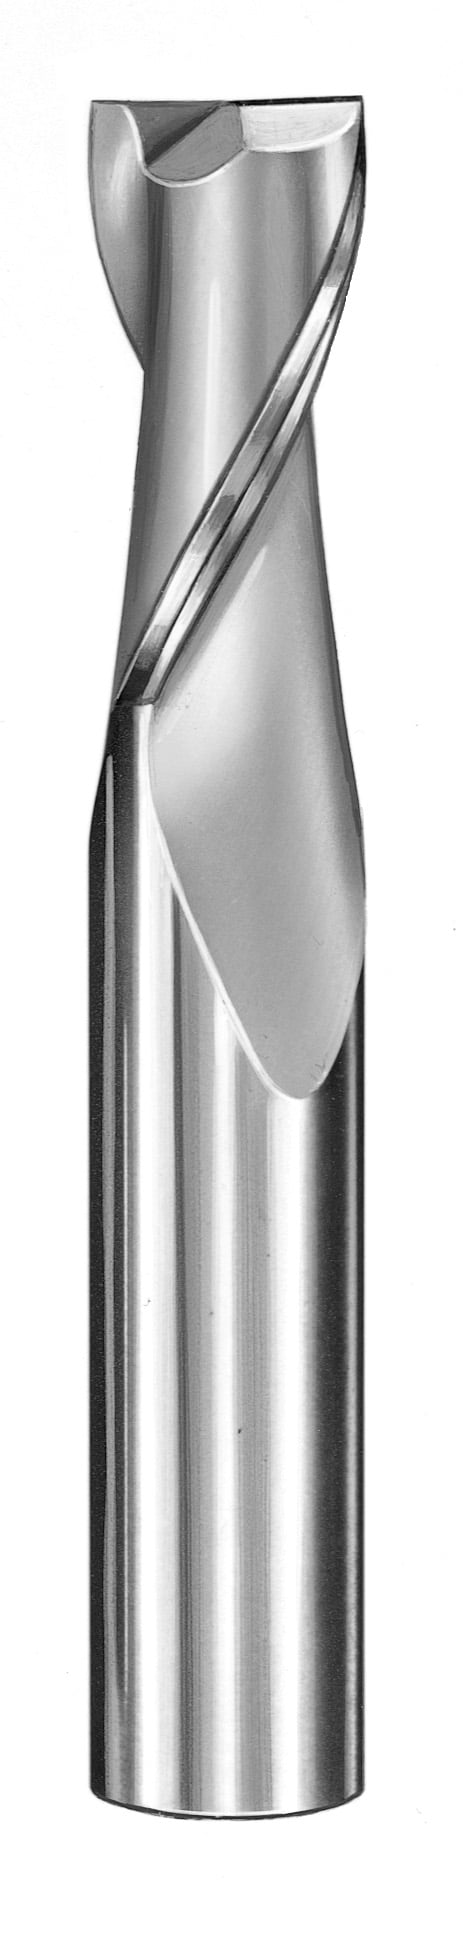 27/64" Dia, 2 Flute, Square End End Mill - 30353